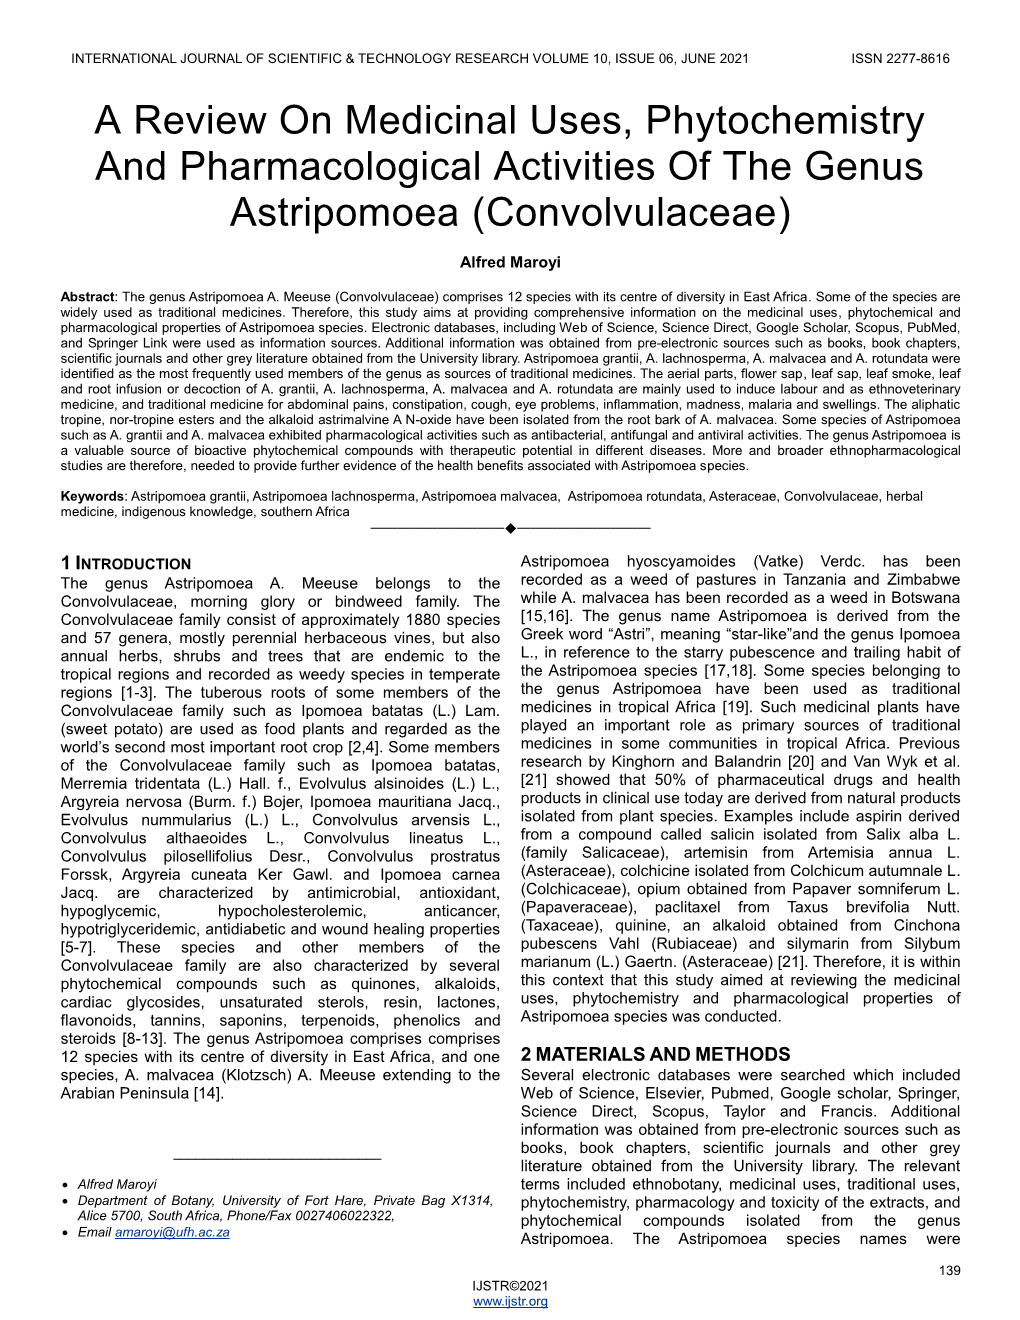 A Review on Medicinal Uses, Phytochemistry and Pharmacological Activities of the Genus Astripomoea (Convolvulaceae)